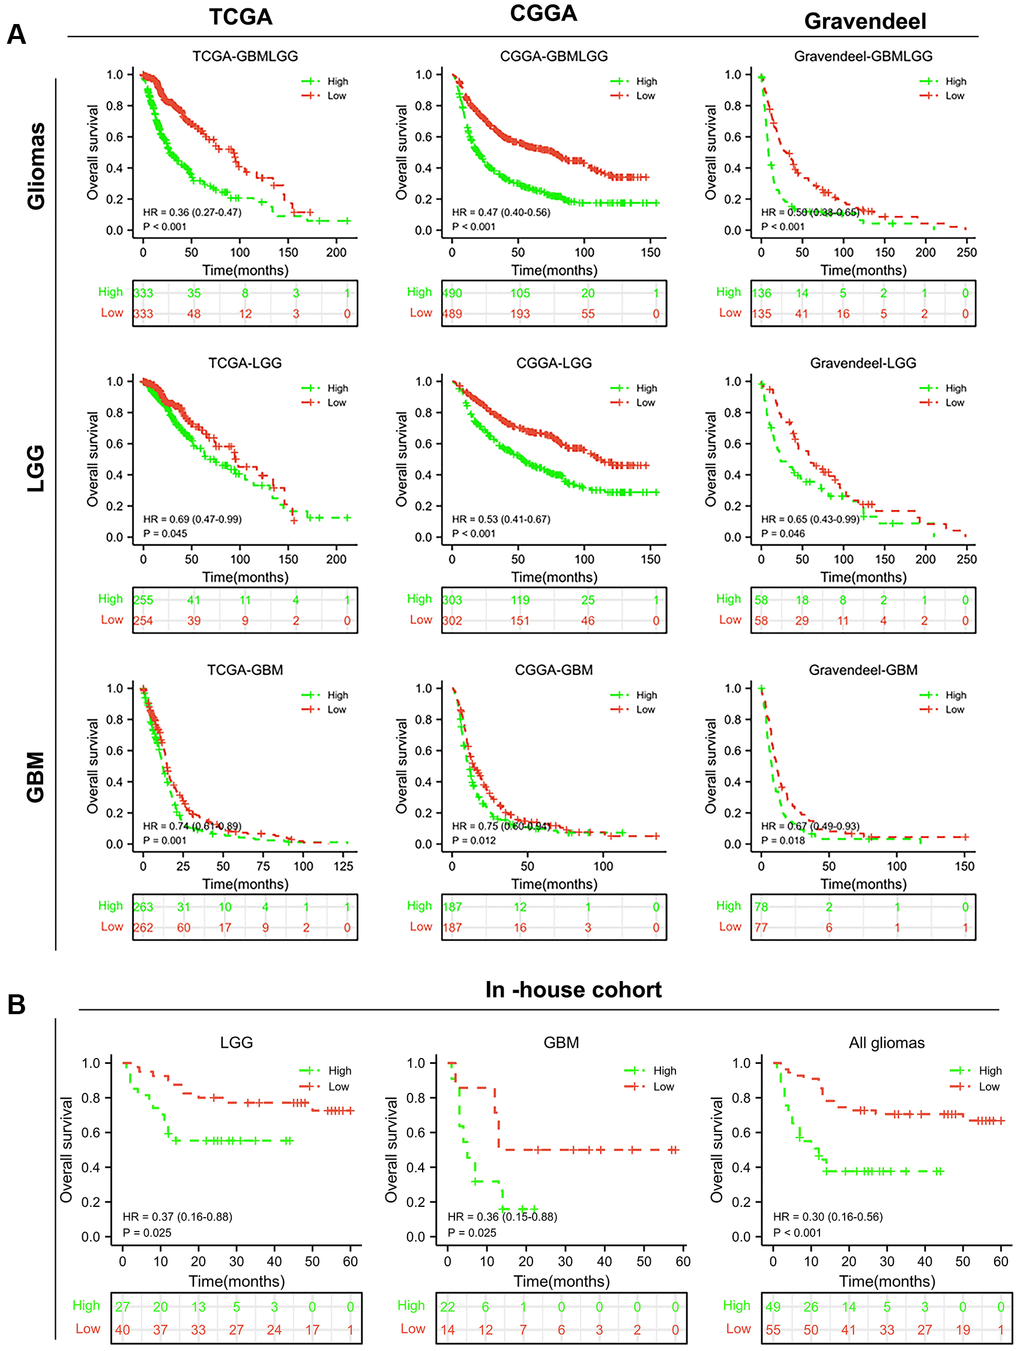 BCL2A1 was an independent prognostic factor for gliomas. (A) Kaplan–Meier survival curves of BCL2A1 in TCGA, CGGA and Gravendeel. (B) Prognostic value of BCL2A1 in an in-house cohort. Abbreviation: HR, hazard ratio.